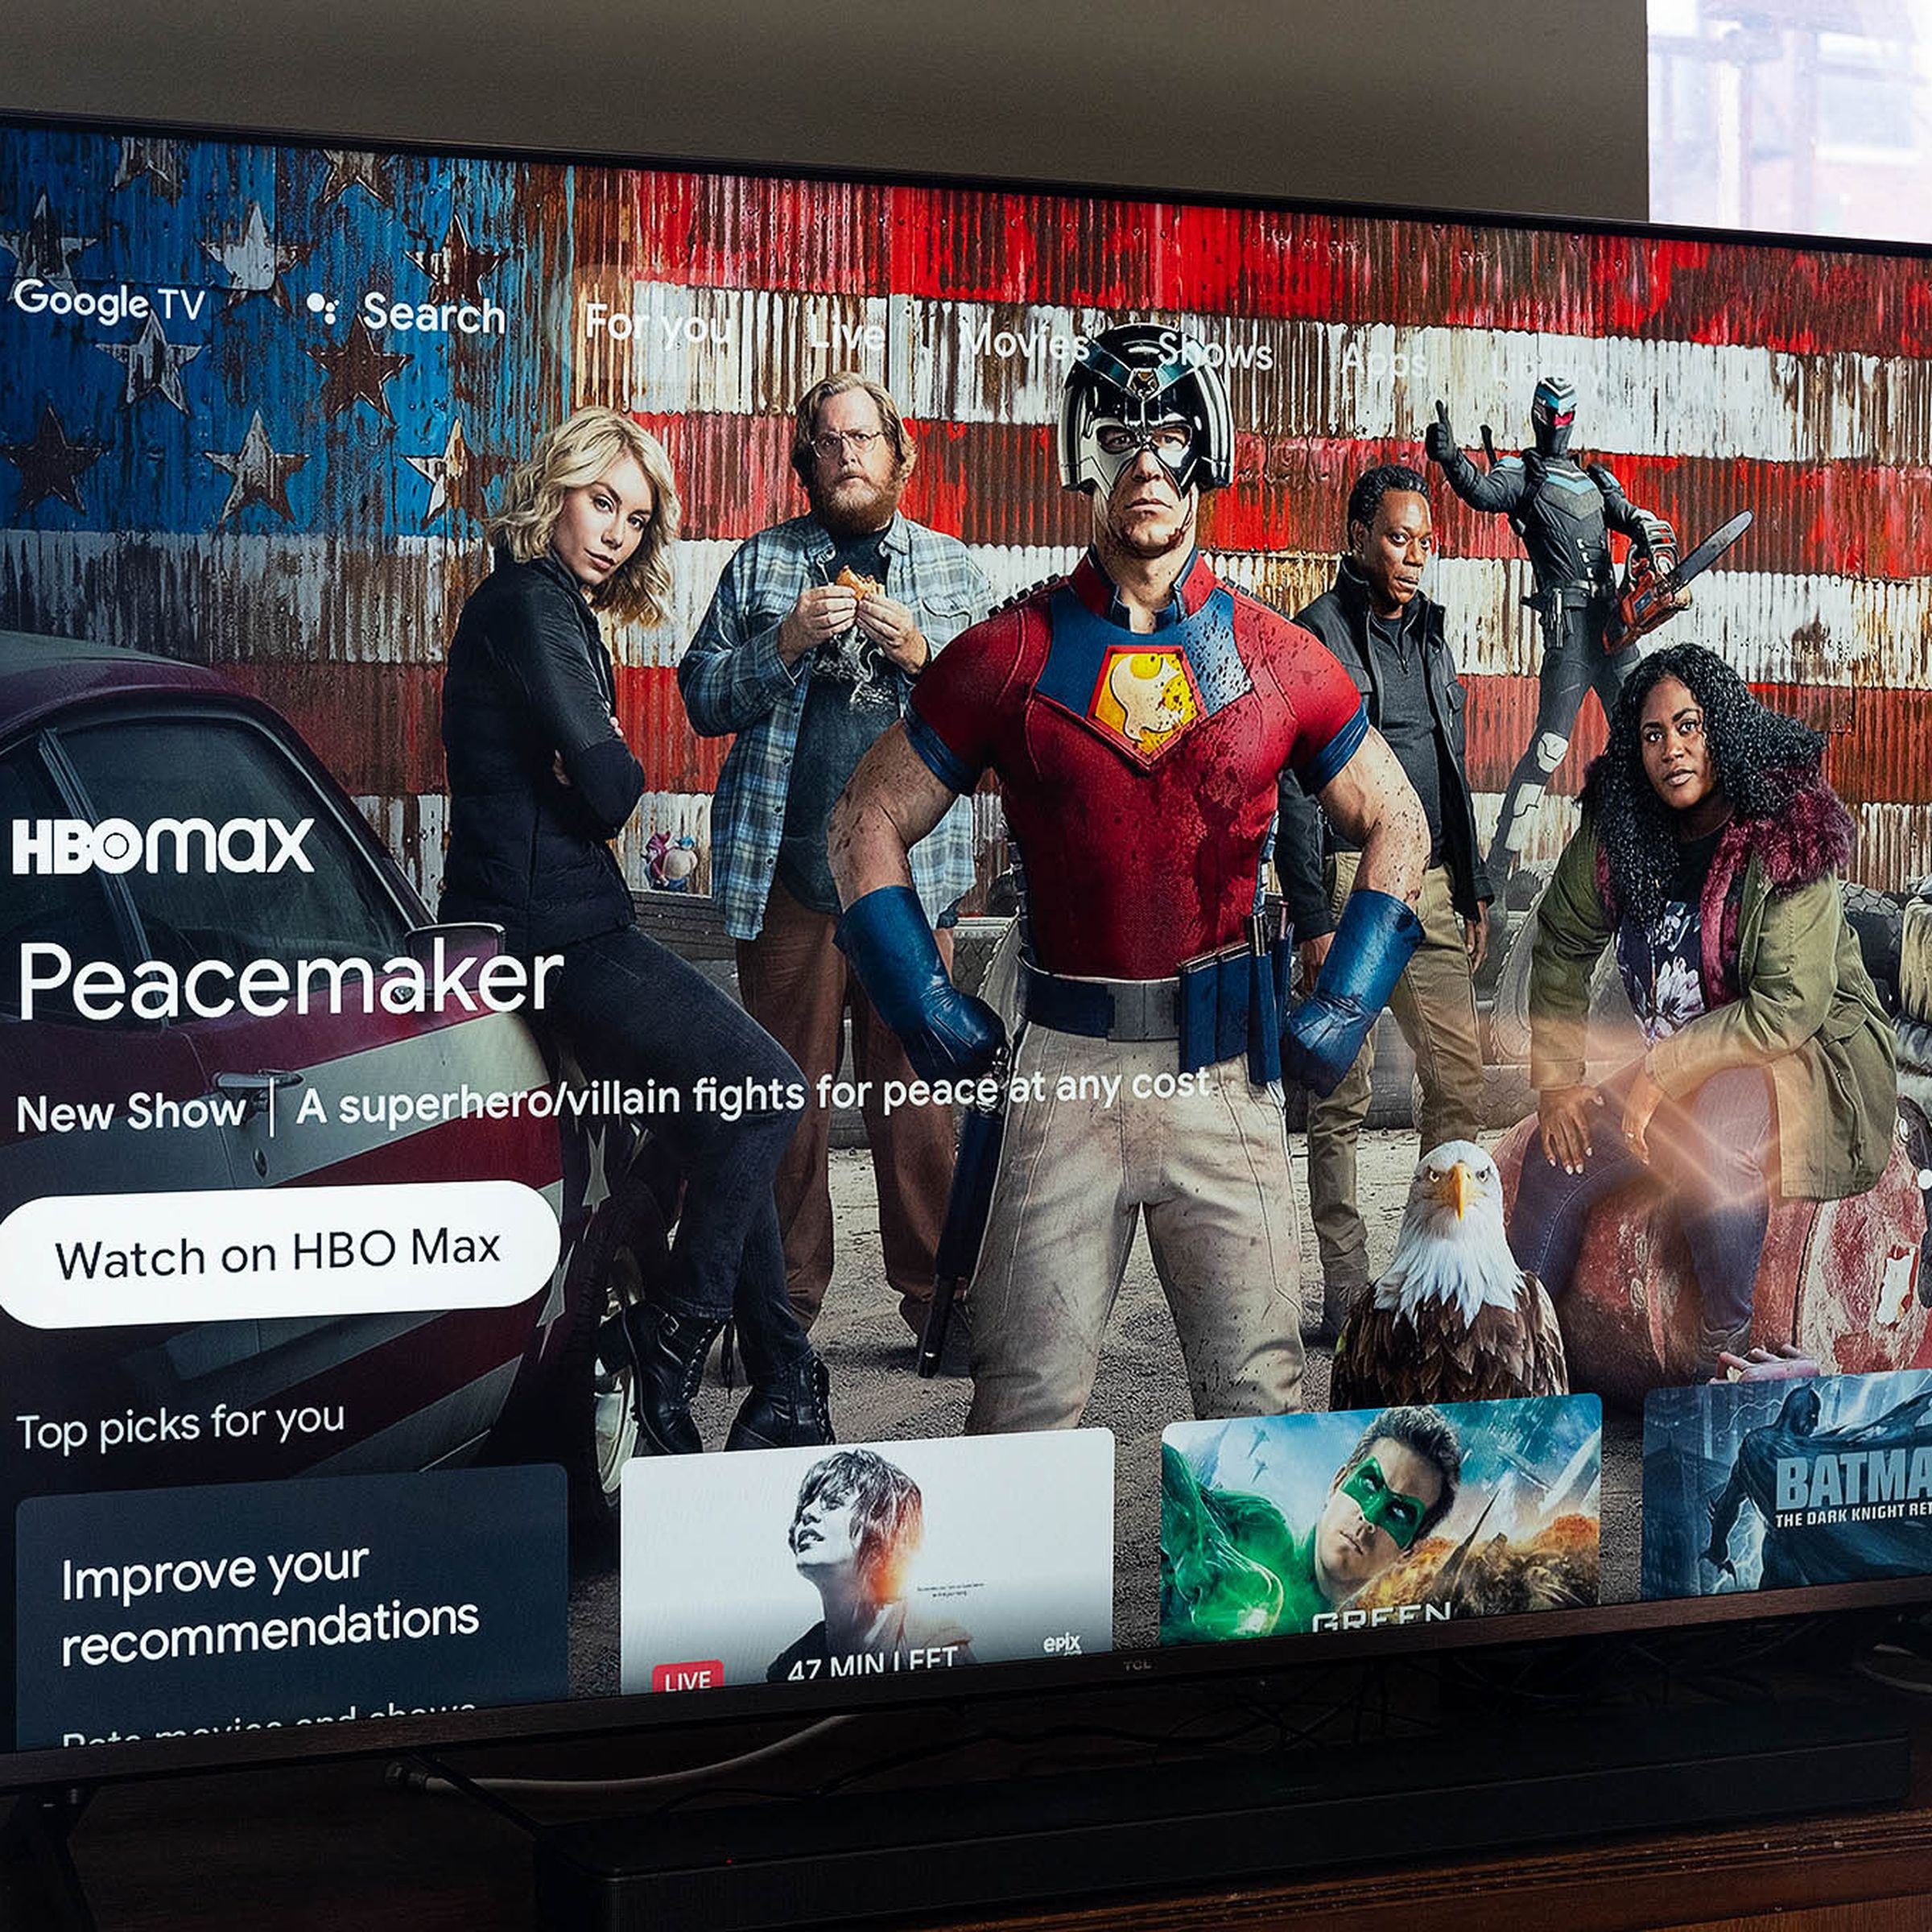 The 55-inch TCL 6-series R646 4K TV is on, displaying the Google TV software homescreen that’s filled with viewing recommendations.